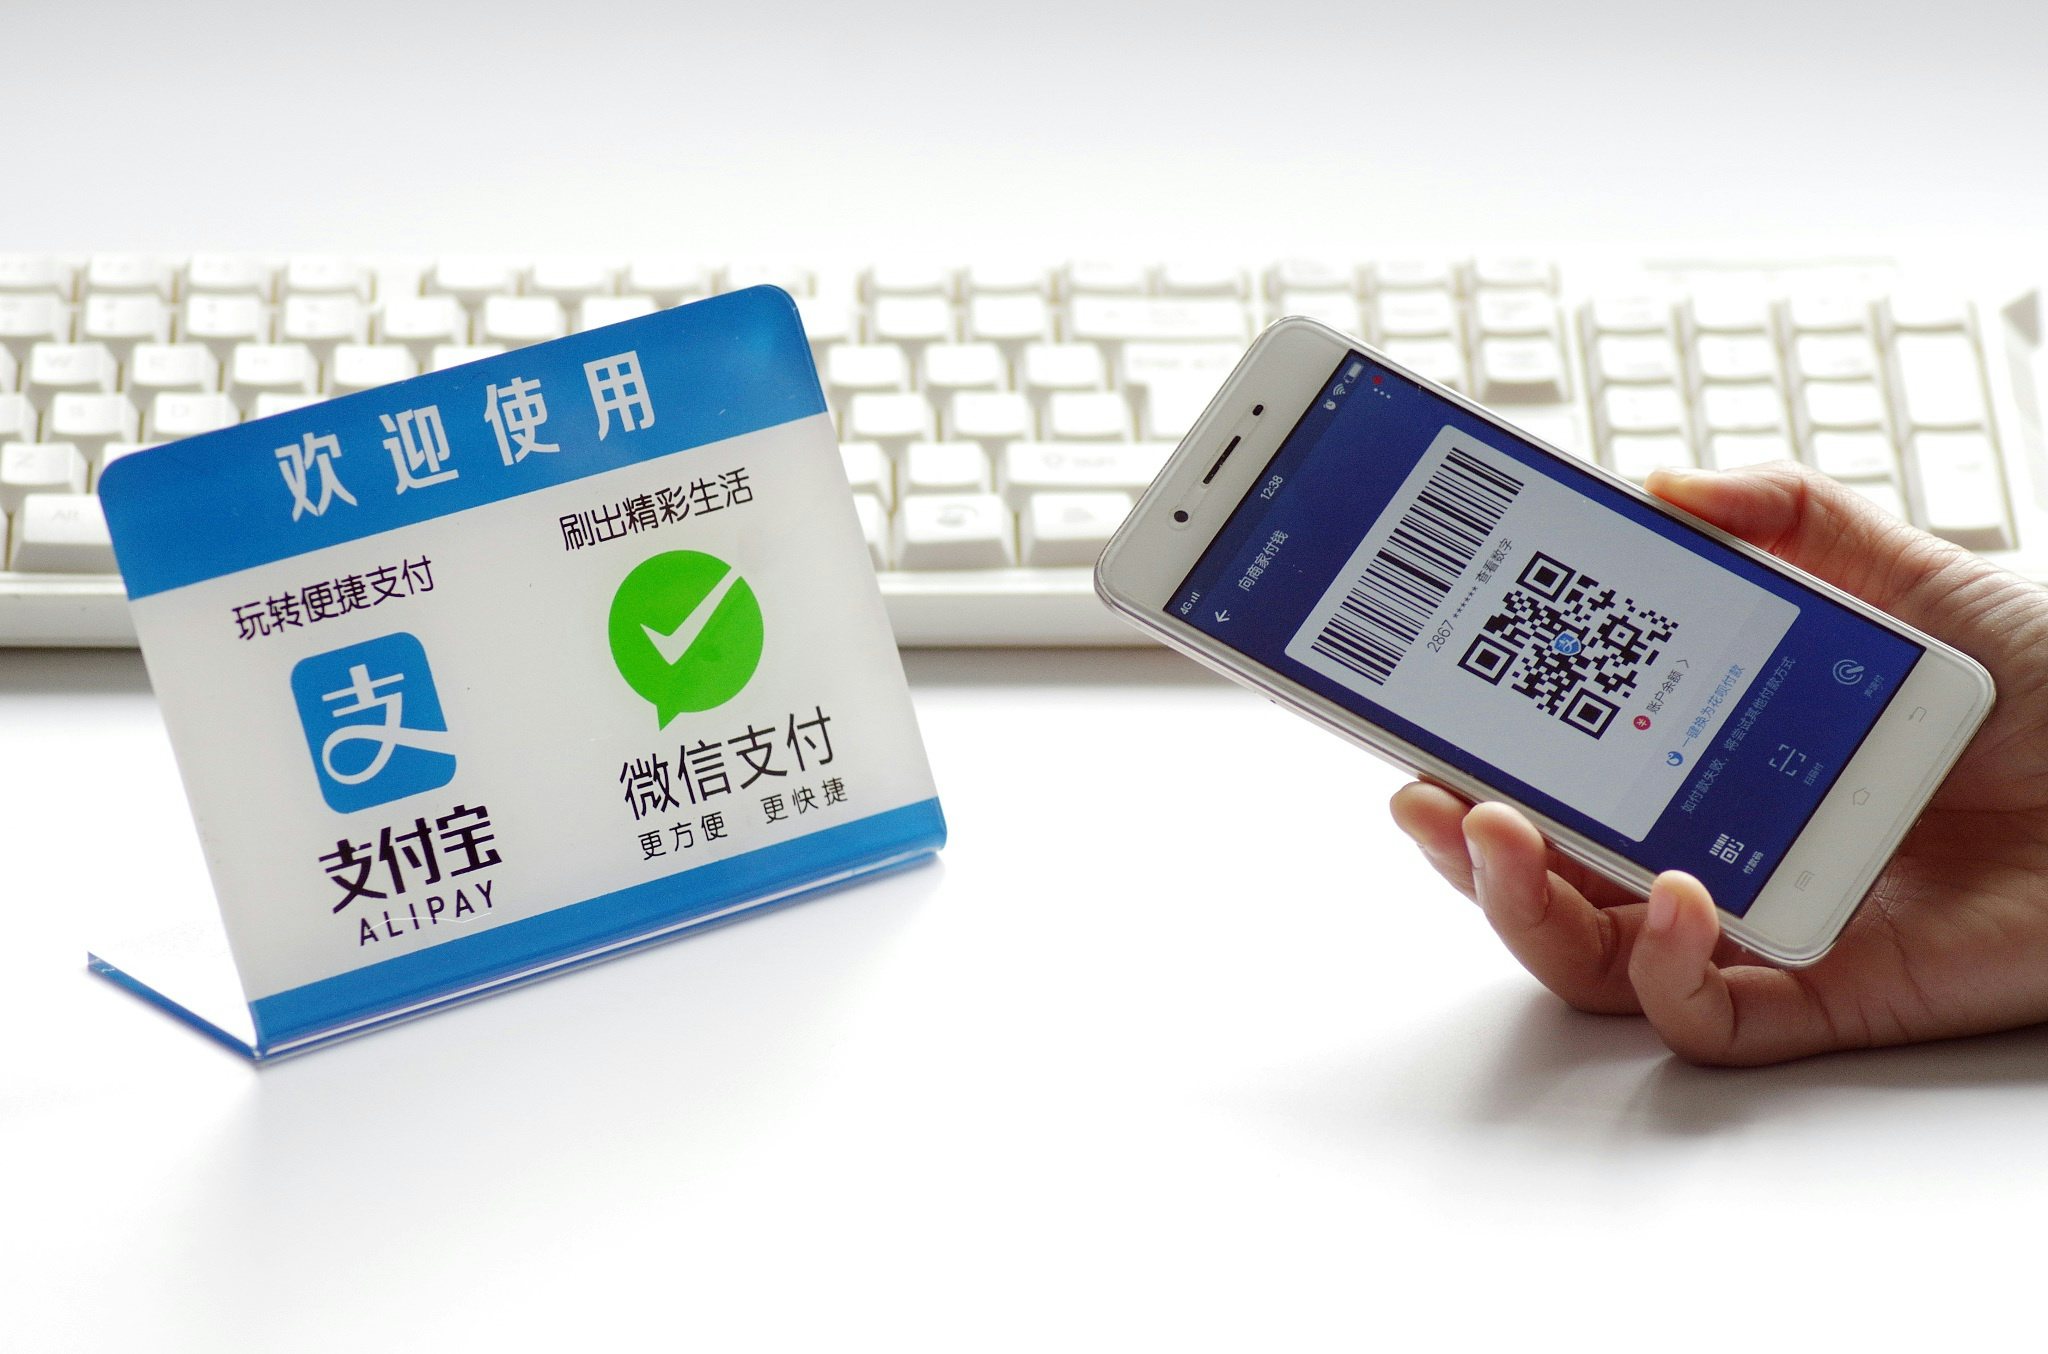 Golden Week overseas spending figures provided by major Chinese mobile payment companies shed light on where the Chinese consumer trend stands. Photo: VCG